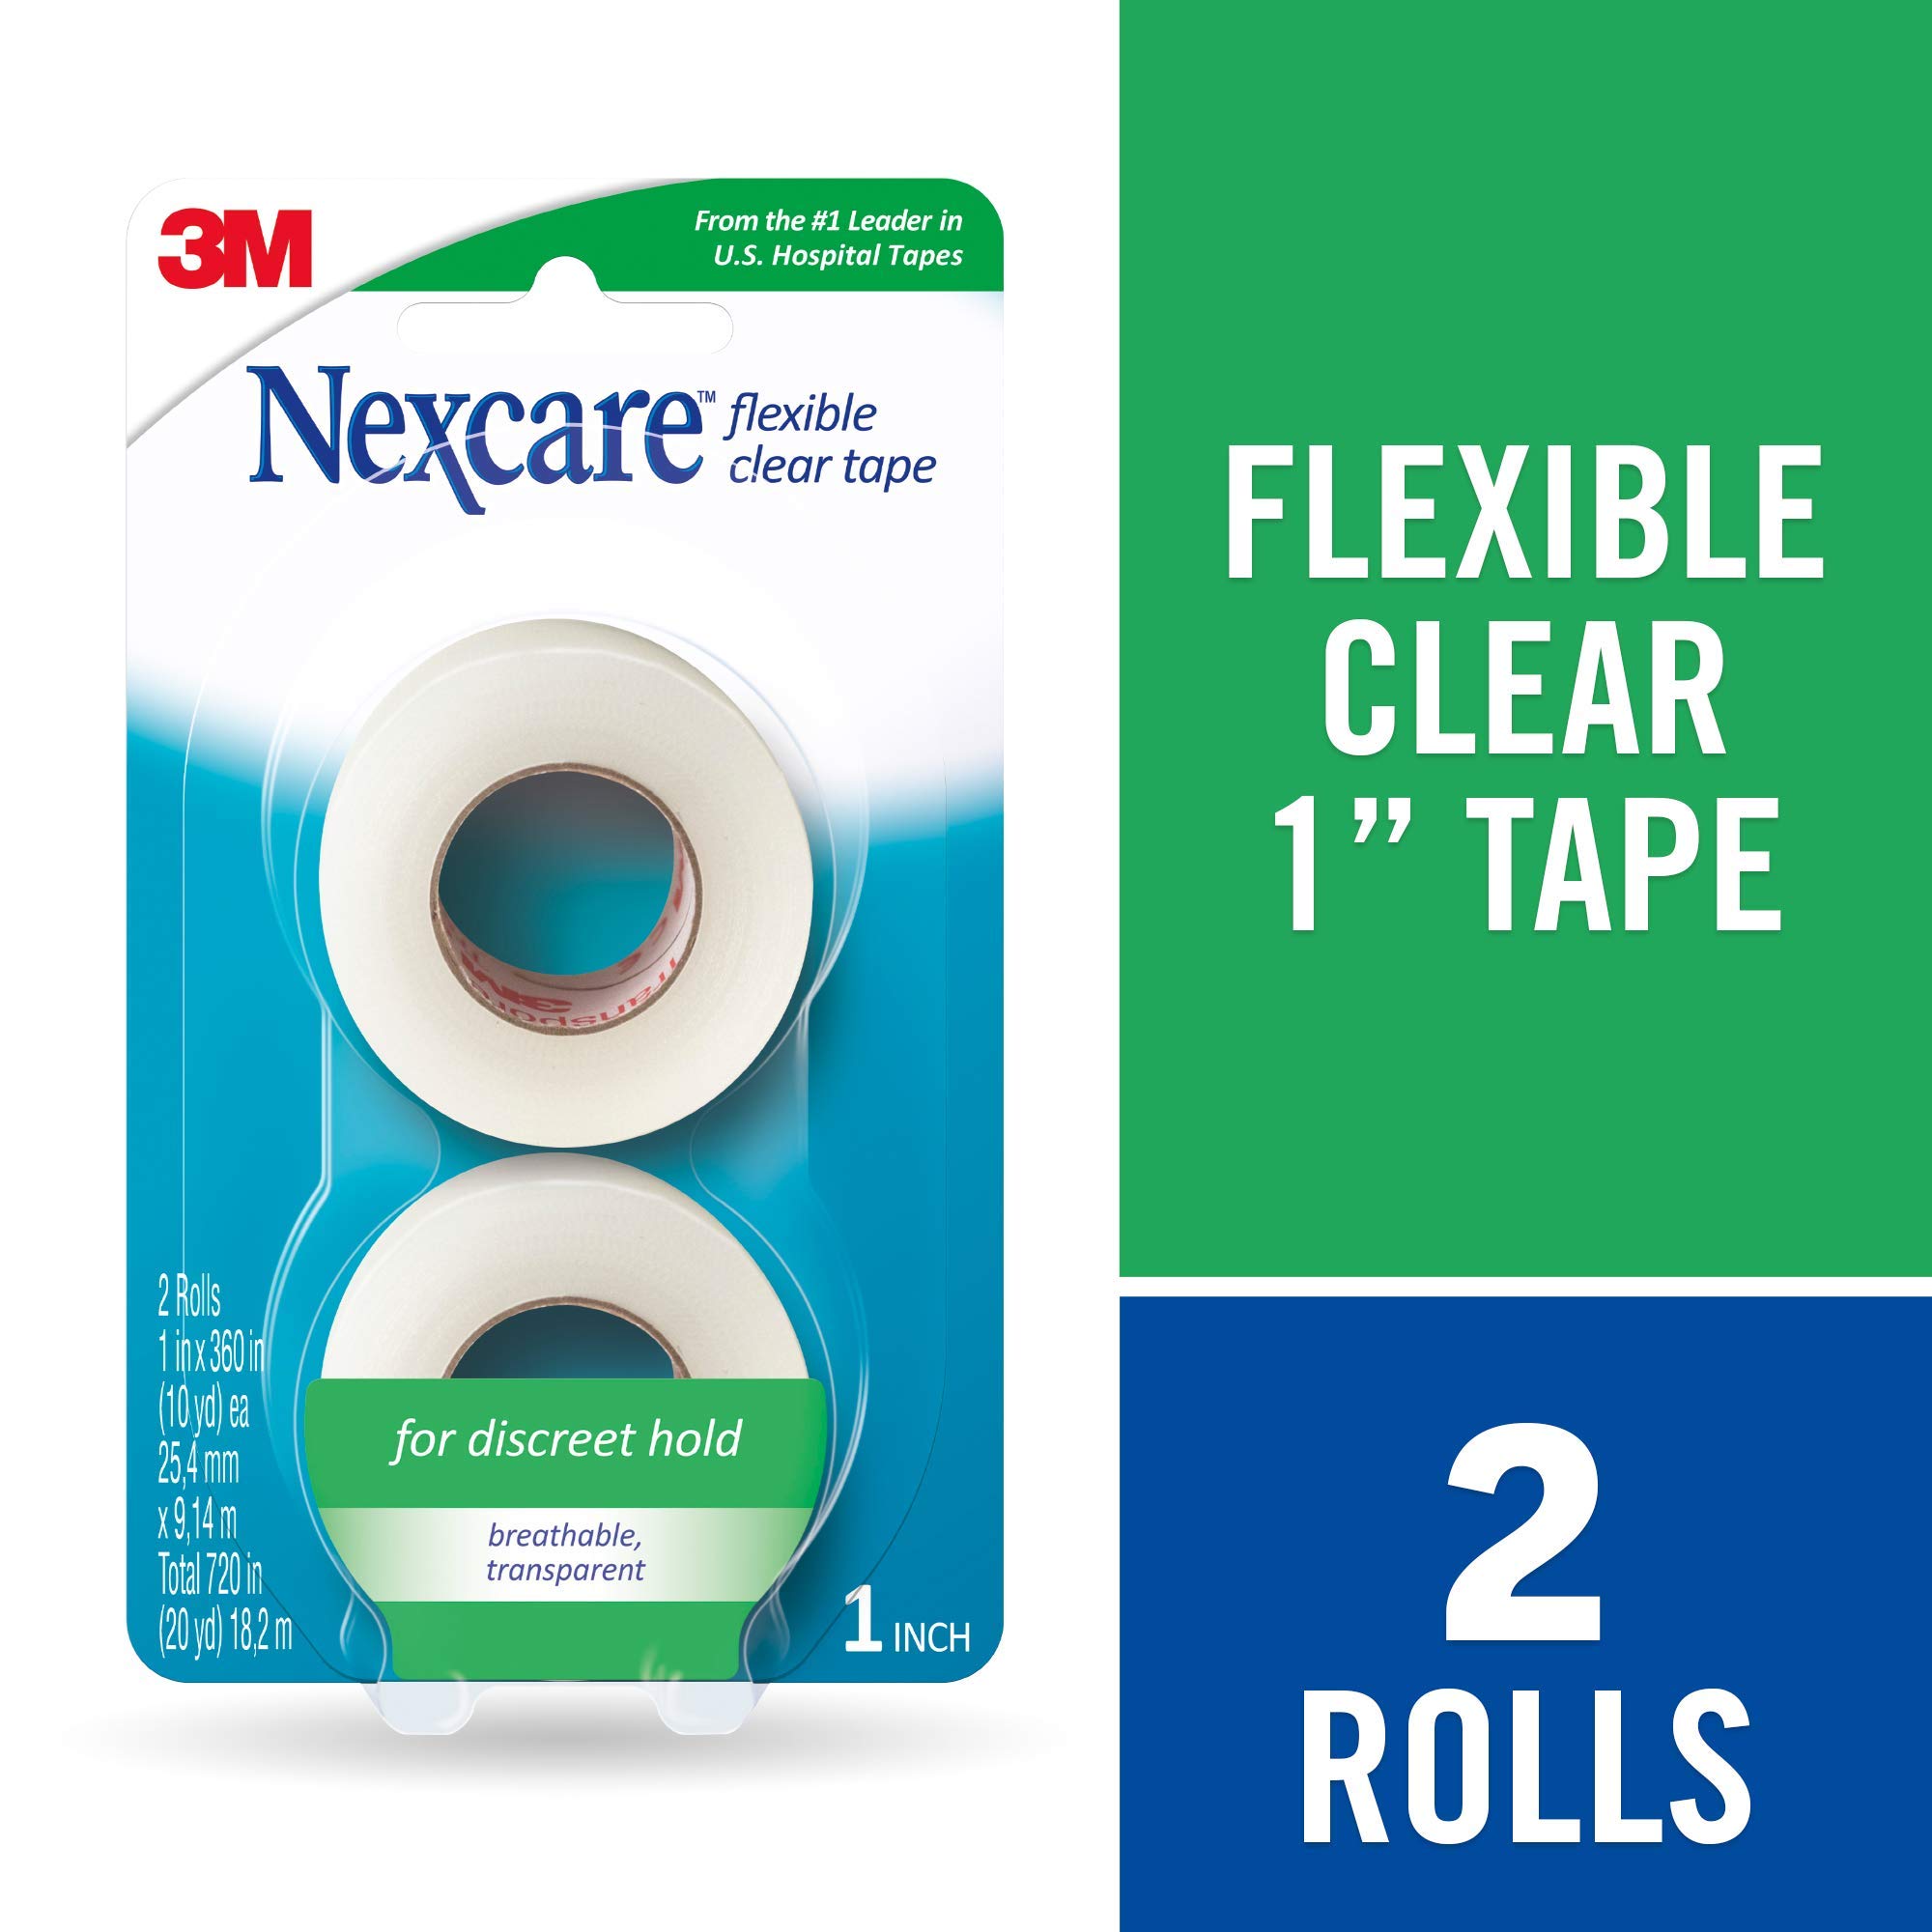 Nexcare Flexible Clear Tape, Tough, It’s clear, Stretchy Design Conforms To Hard To Tape Areas, 1-Inch X 10-Yards (Pack of 2)